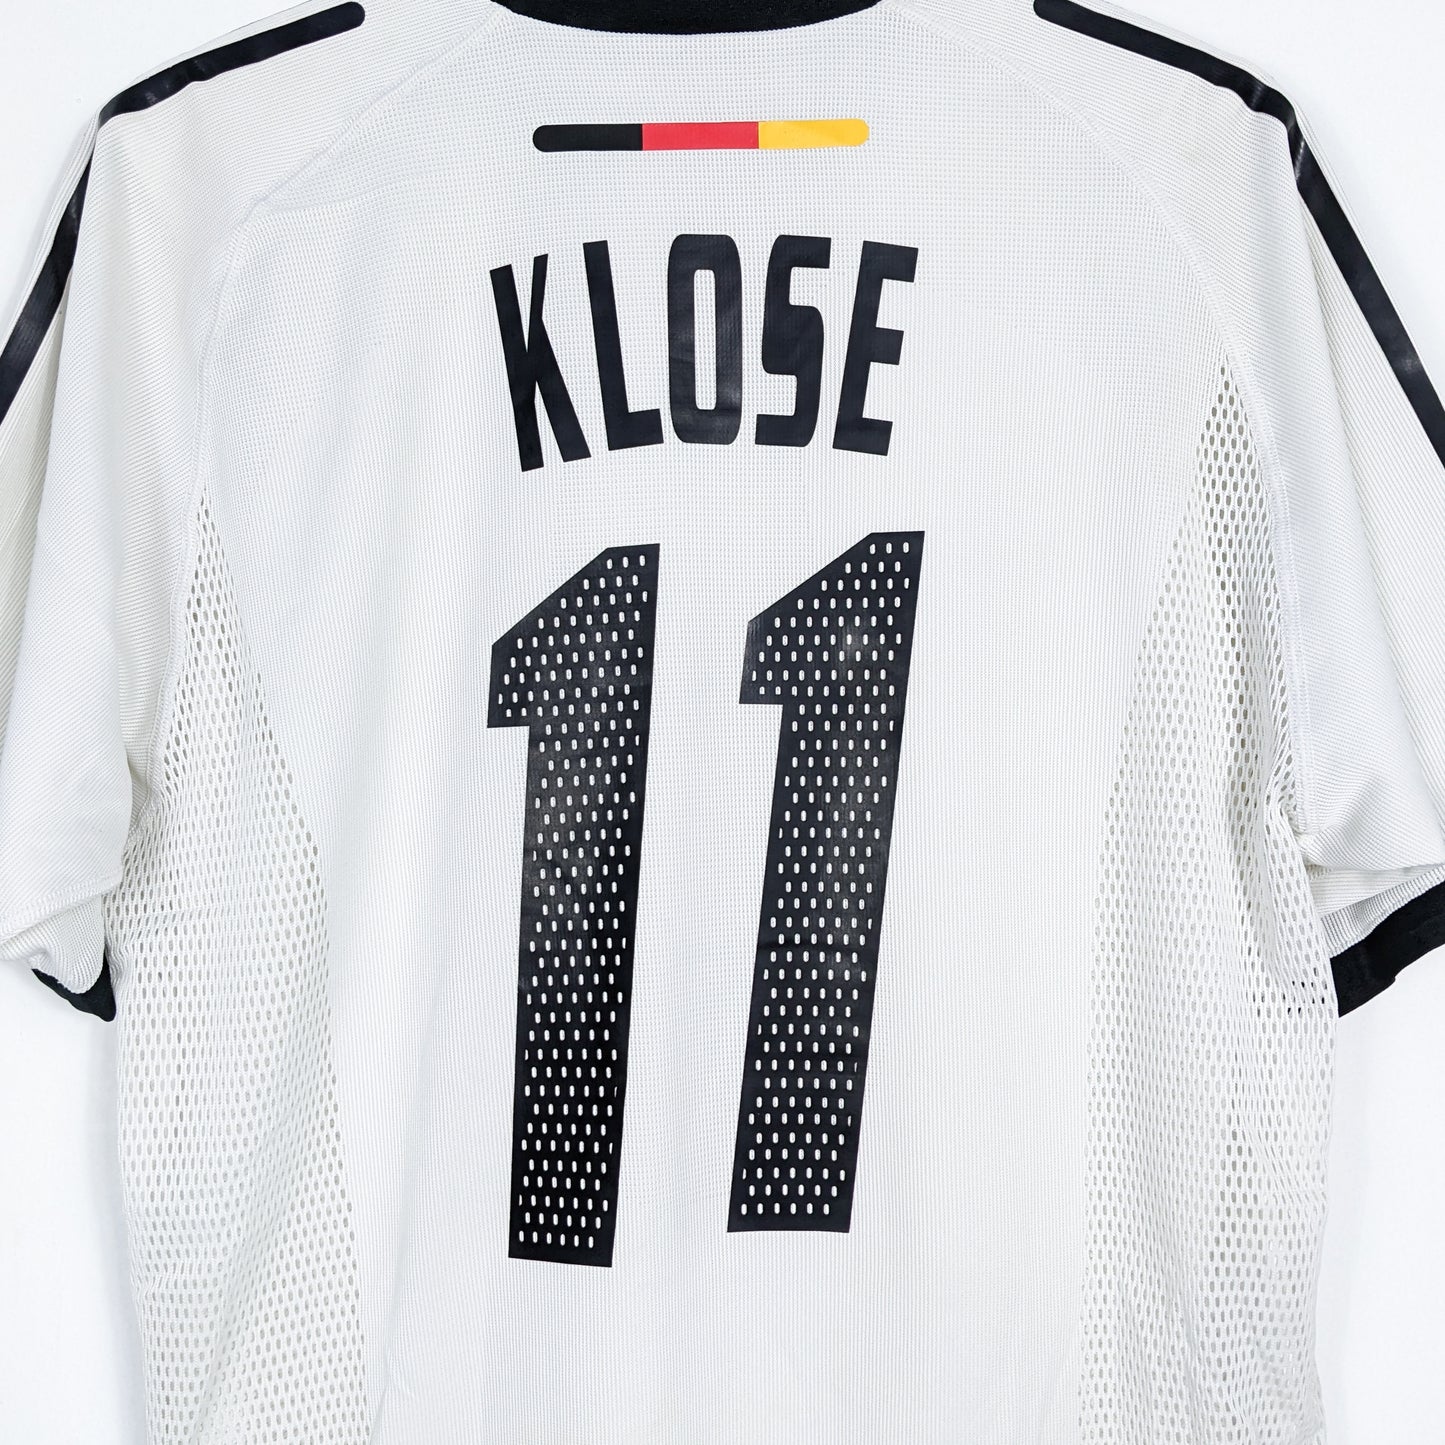 Authentic Germany 2002 Home - Klose #11 Size L (Player Issue)